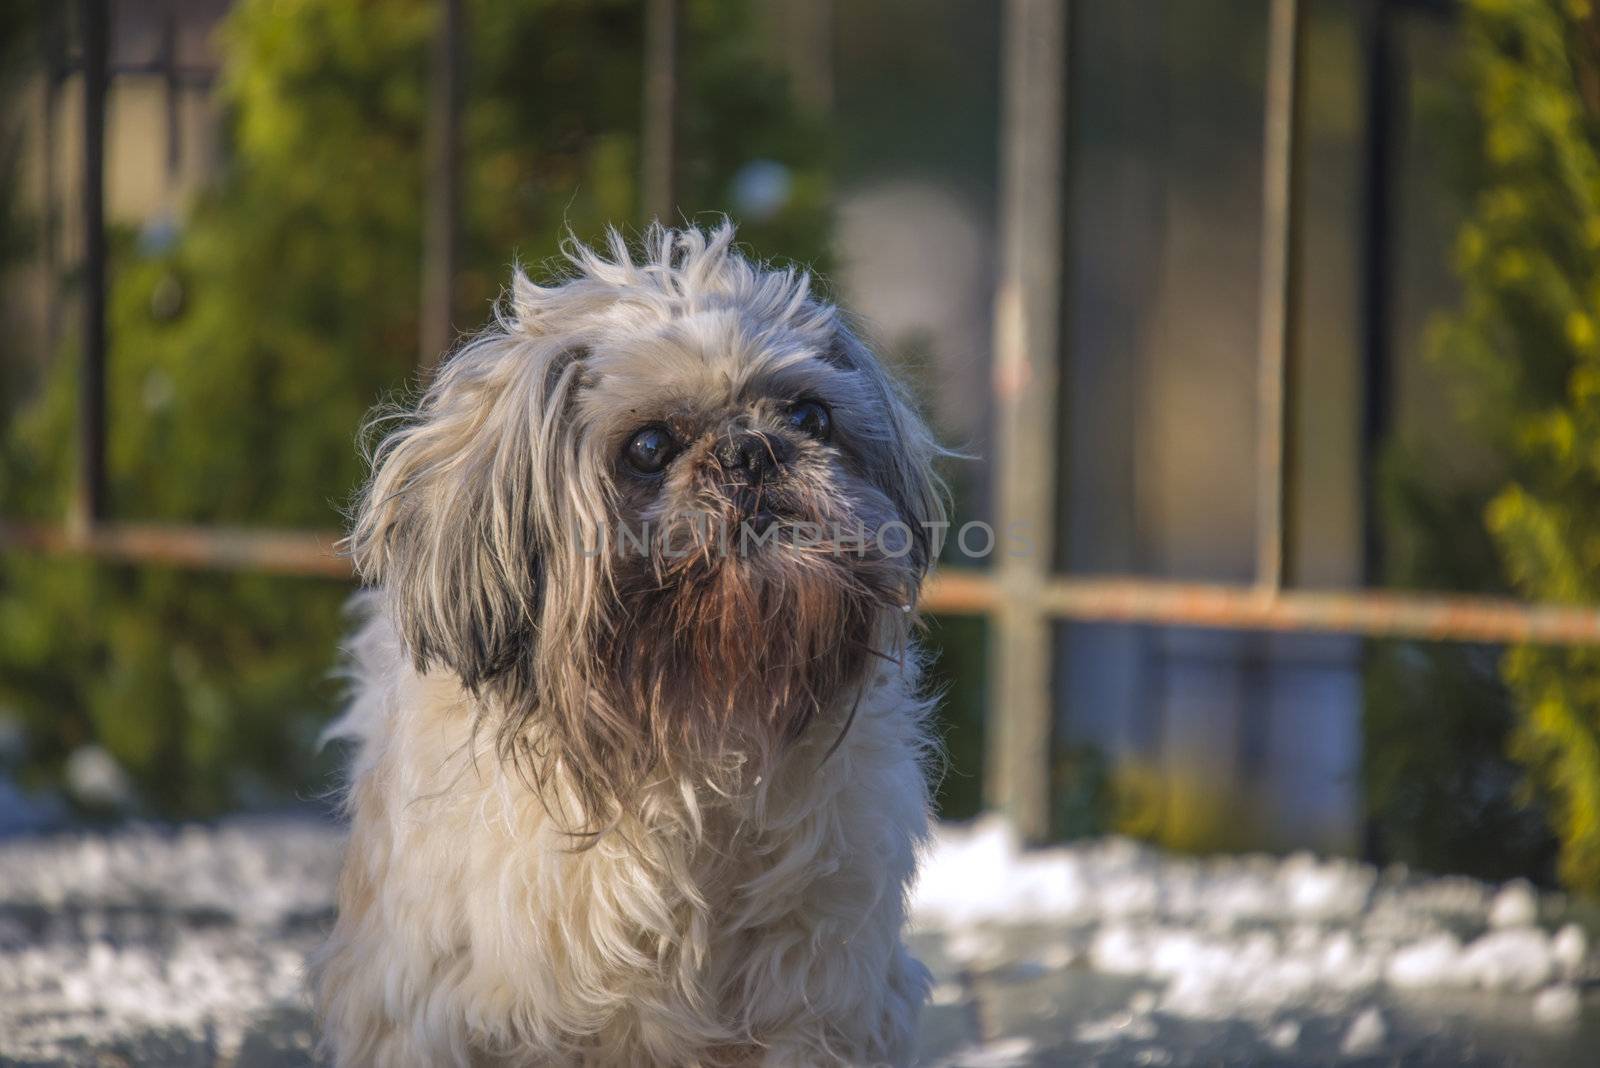 otto is an older shih tzu (also called chinese lion dog) but is still going strong and has a great charm, the image is shot in feruar 2013 at the home of a friend of mine in halden